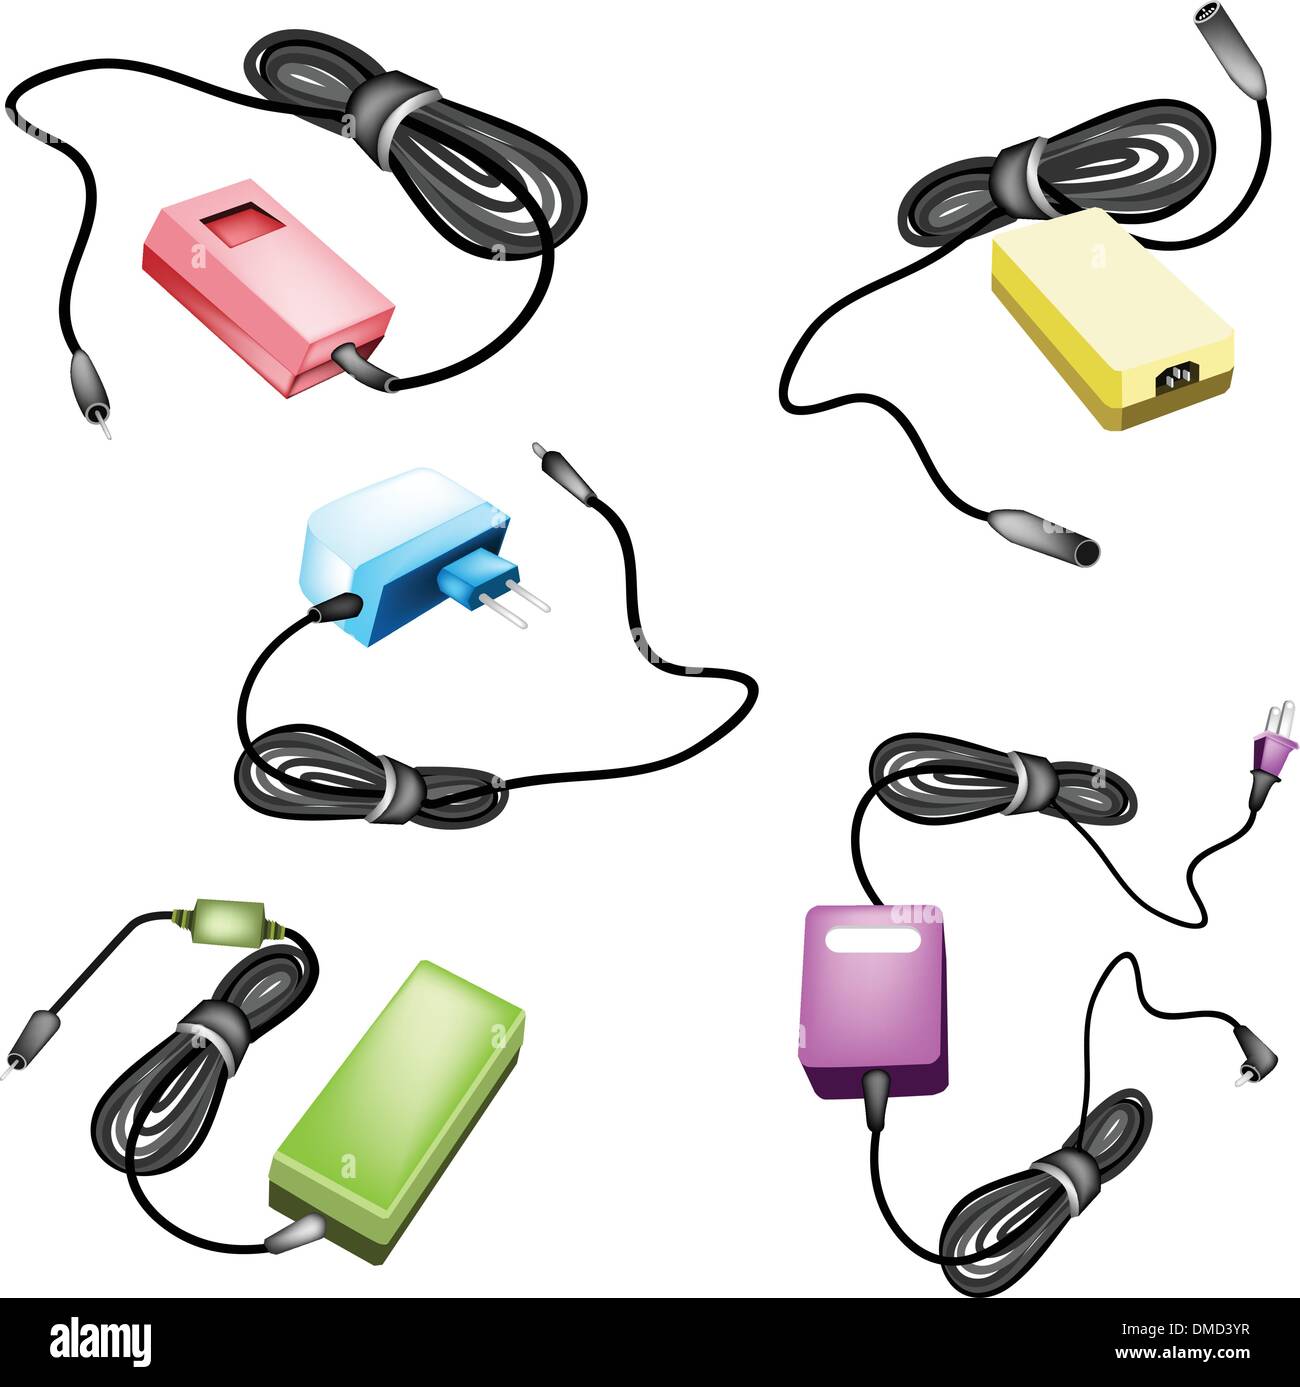 A Colorful Illustration Set of Adaptor Power Supply Stock Vector